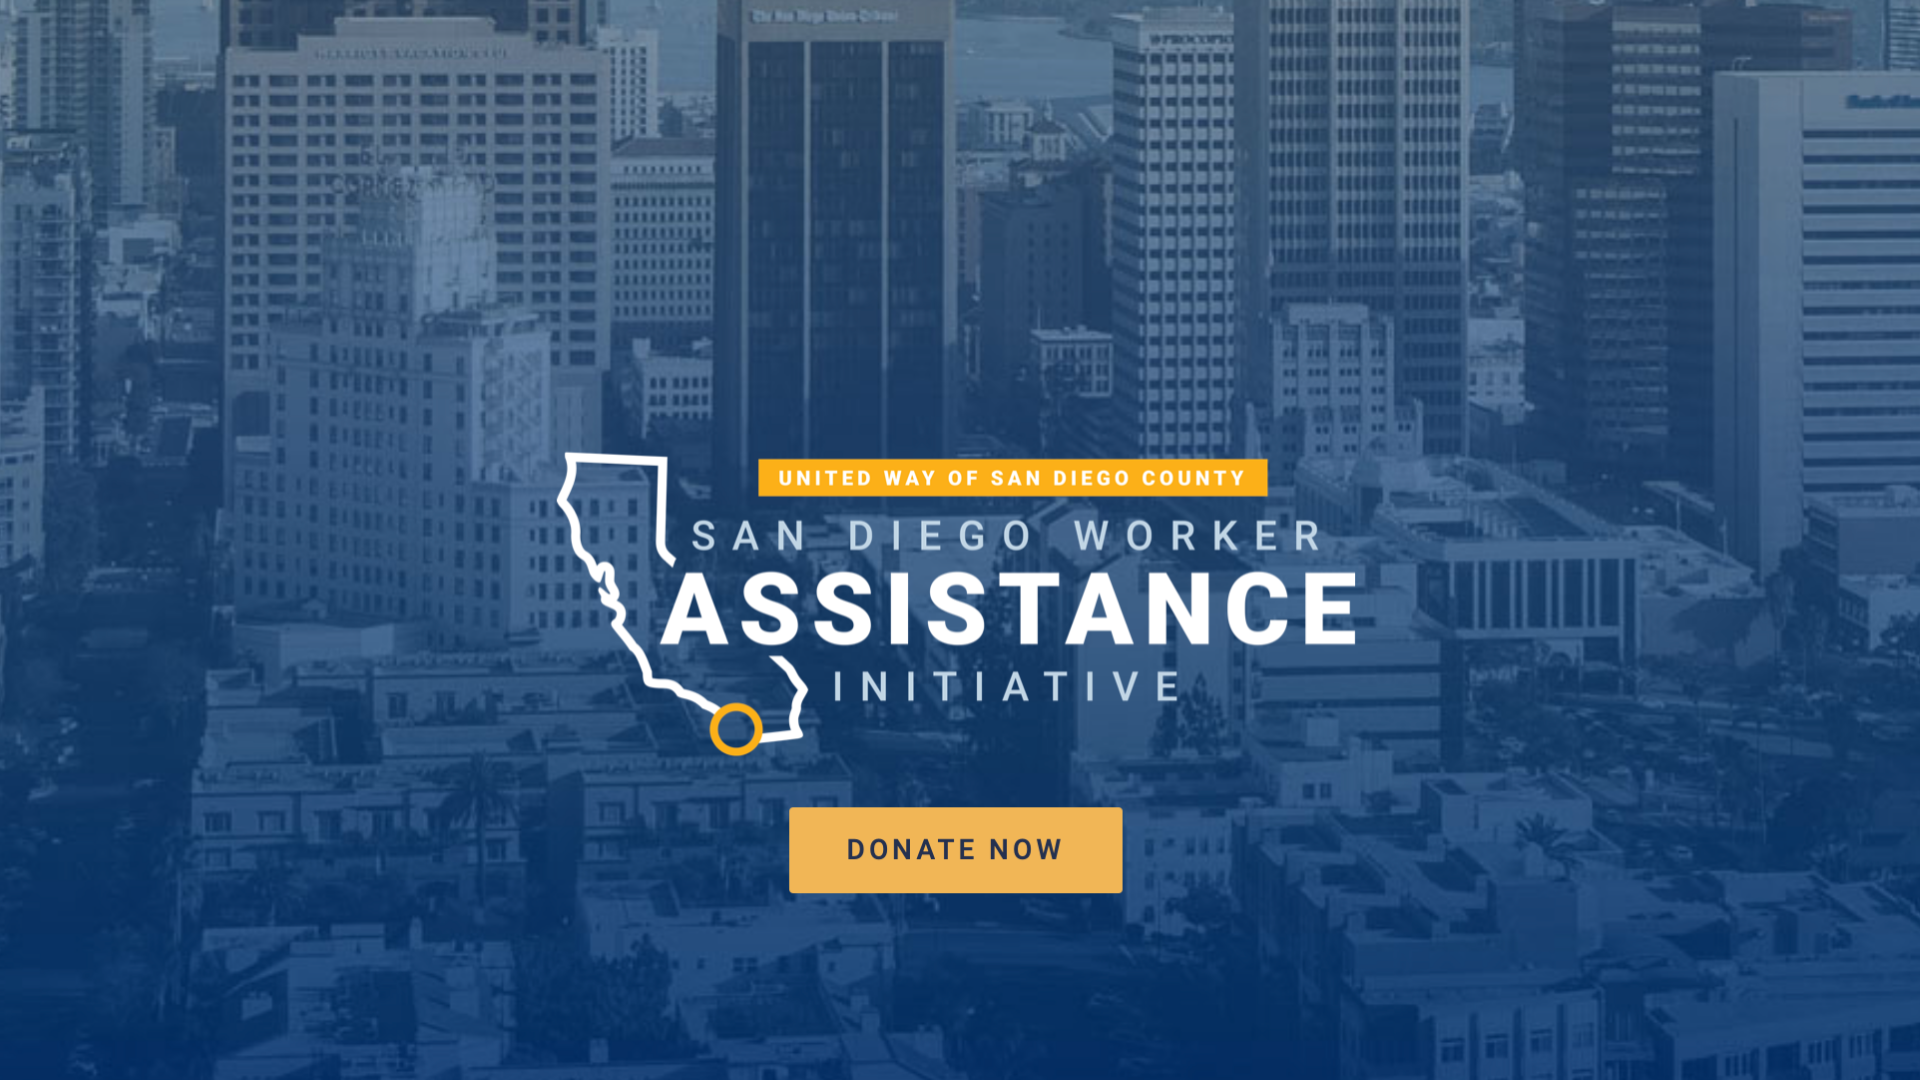 United Way of San Diego County Creates Emergency San Diego Worker Assistance Initiative in Response to COVID-19 Pandemic